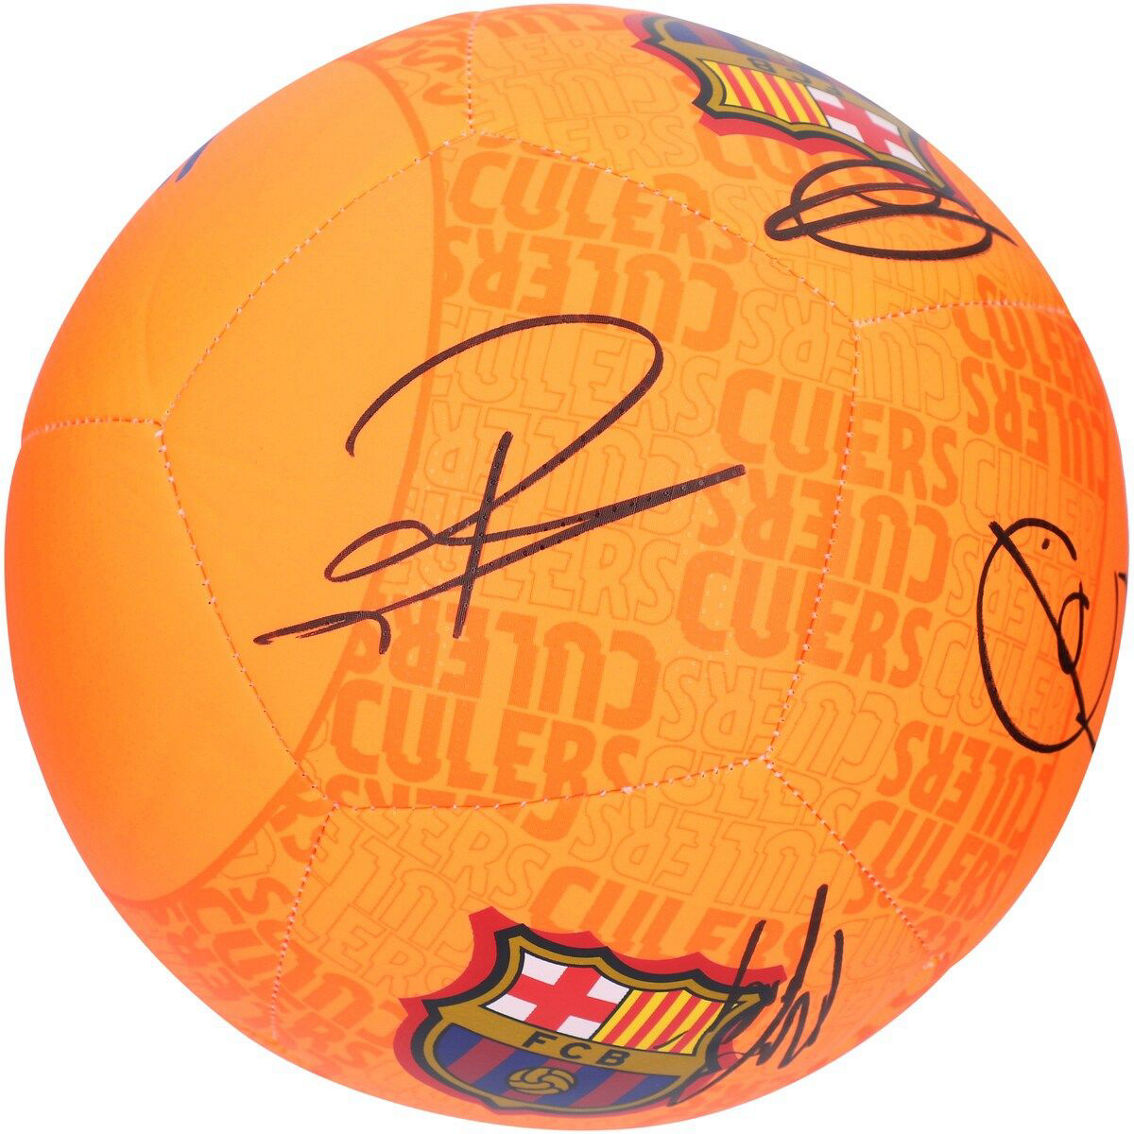 Fanatics Authentic Barcelona Autographed 2021-22 Soccer Ball with Multiple Signatures - Image 2 of 4